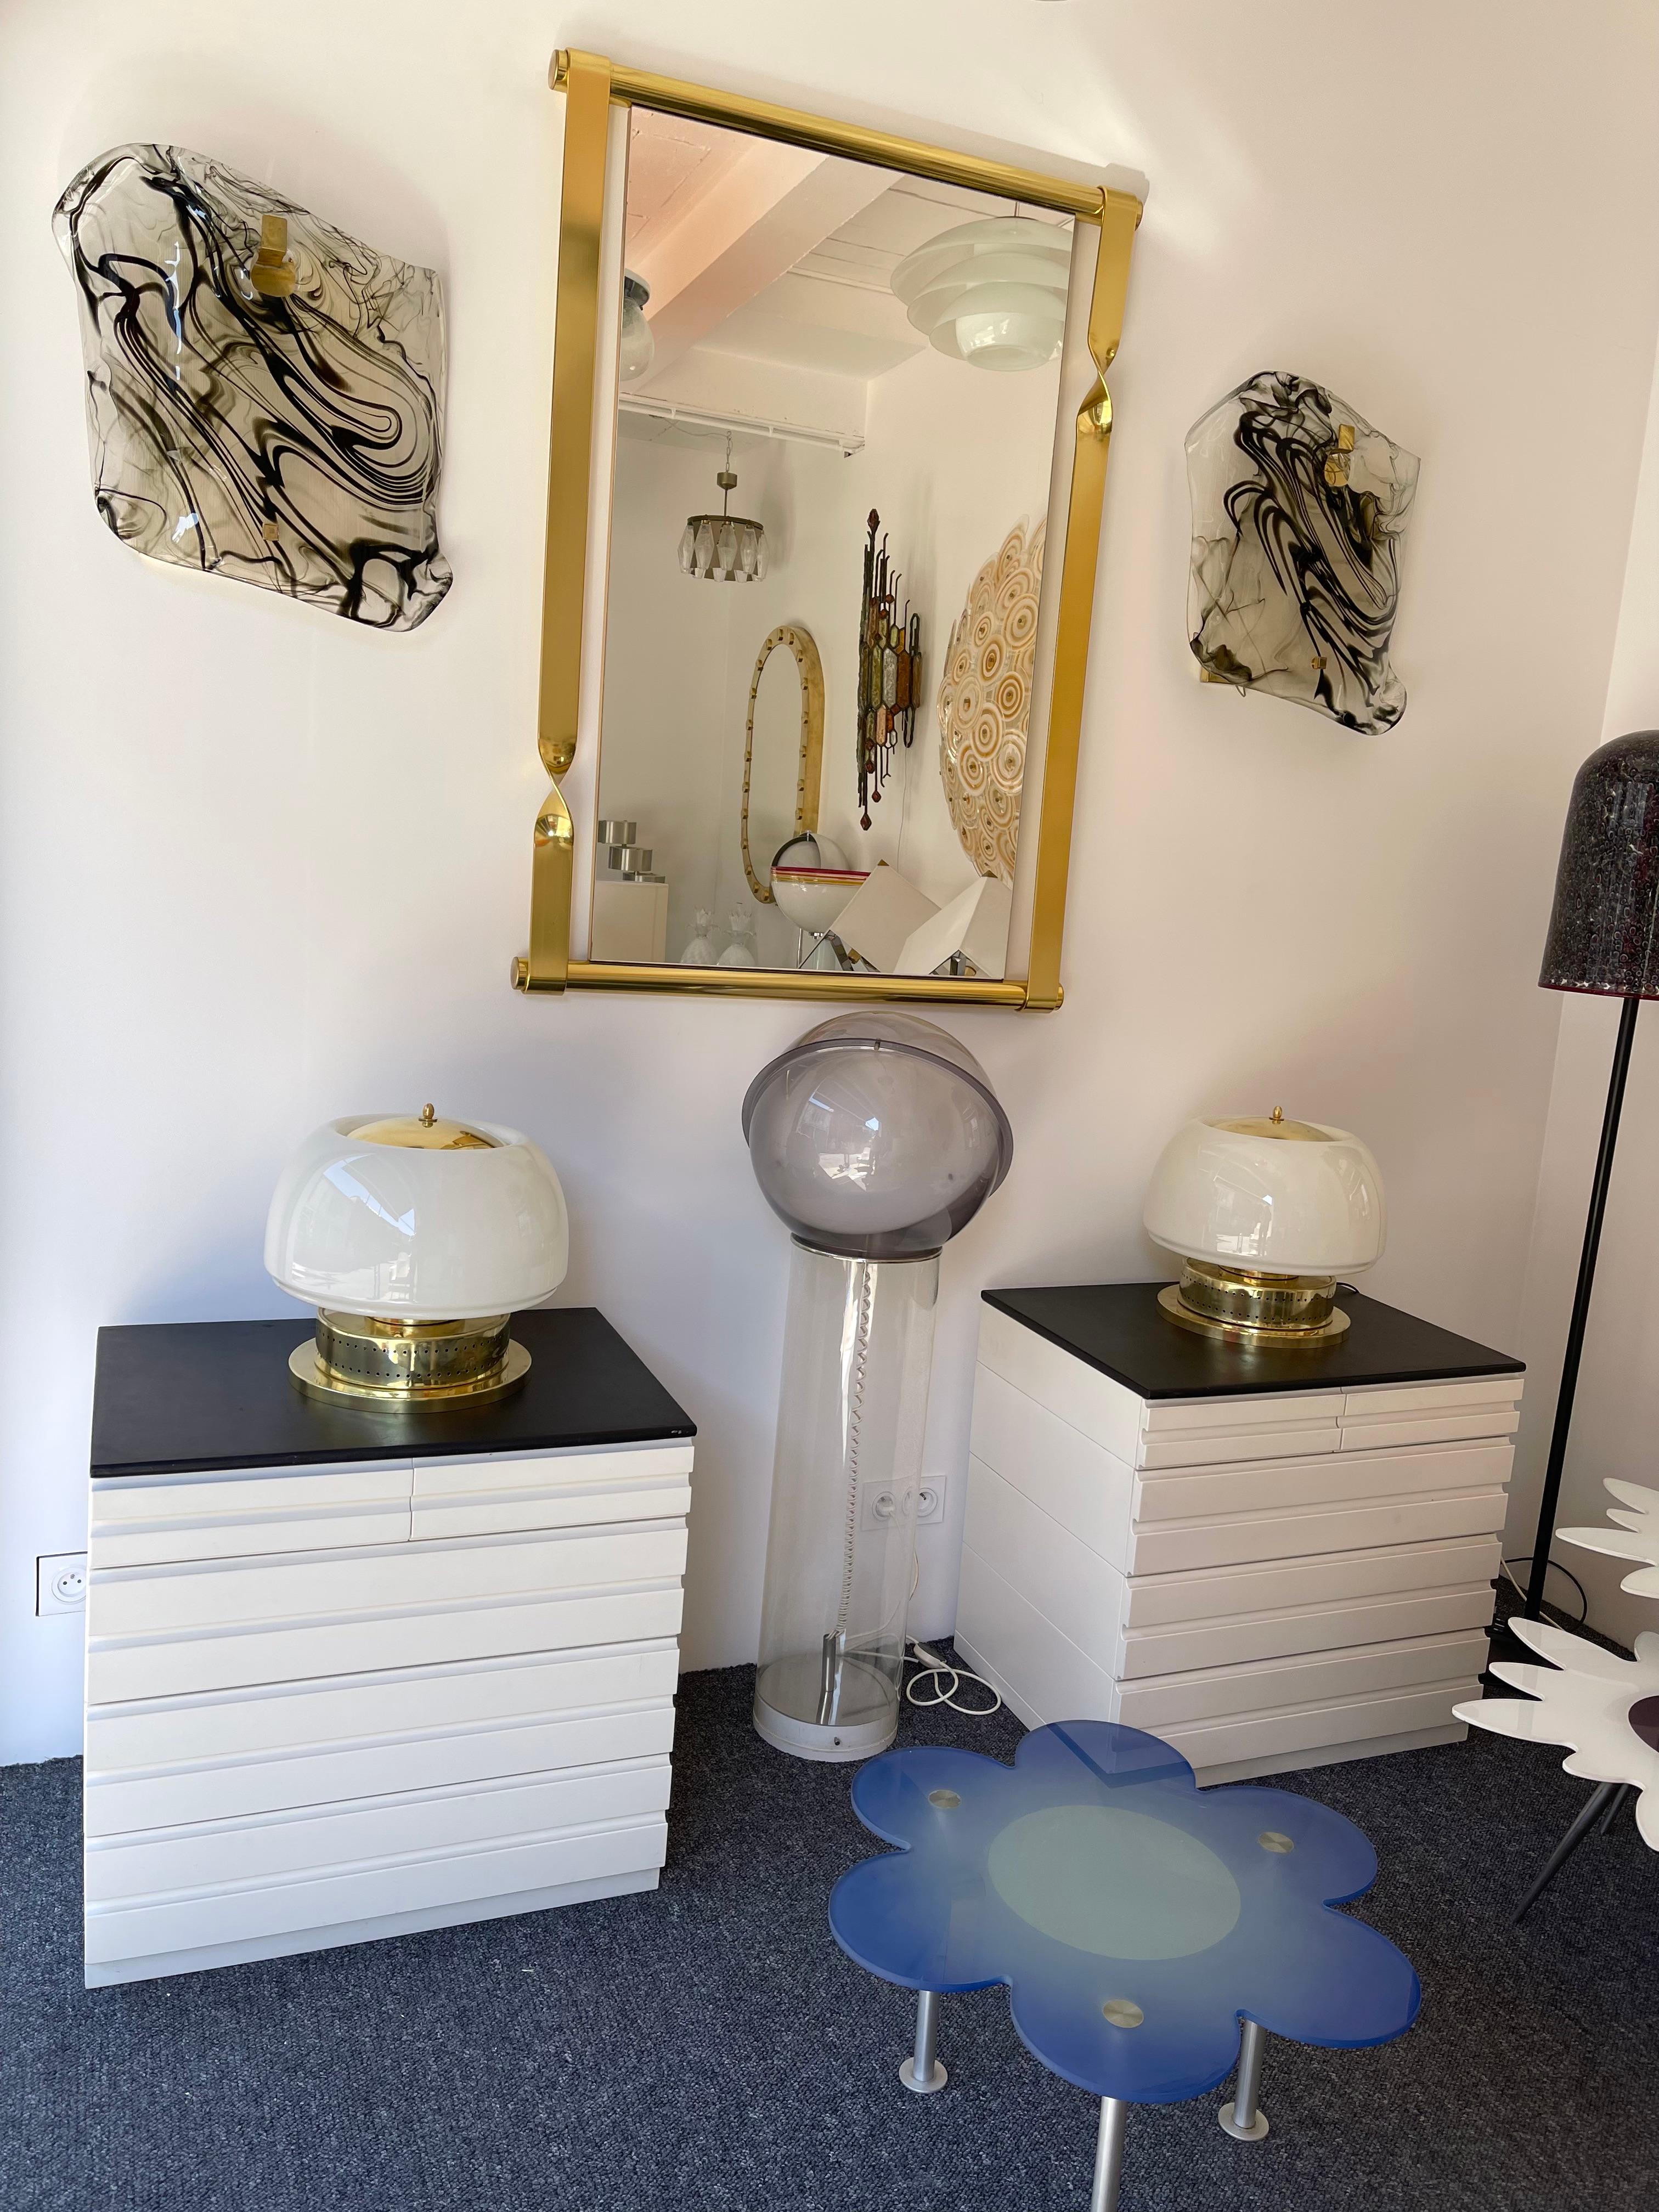 Pair of Murano glass opaline and brass mushroom table or bedside lamps. Contemporary work from a small artisanal italian design workshop. Lightning base with a socket. In the mood of Mid-Century Modern, Hollywood Regency, Venini, Mazzega, La